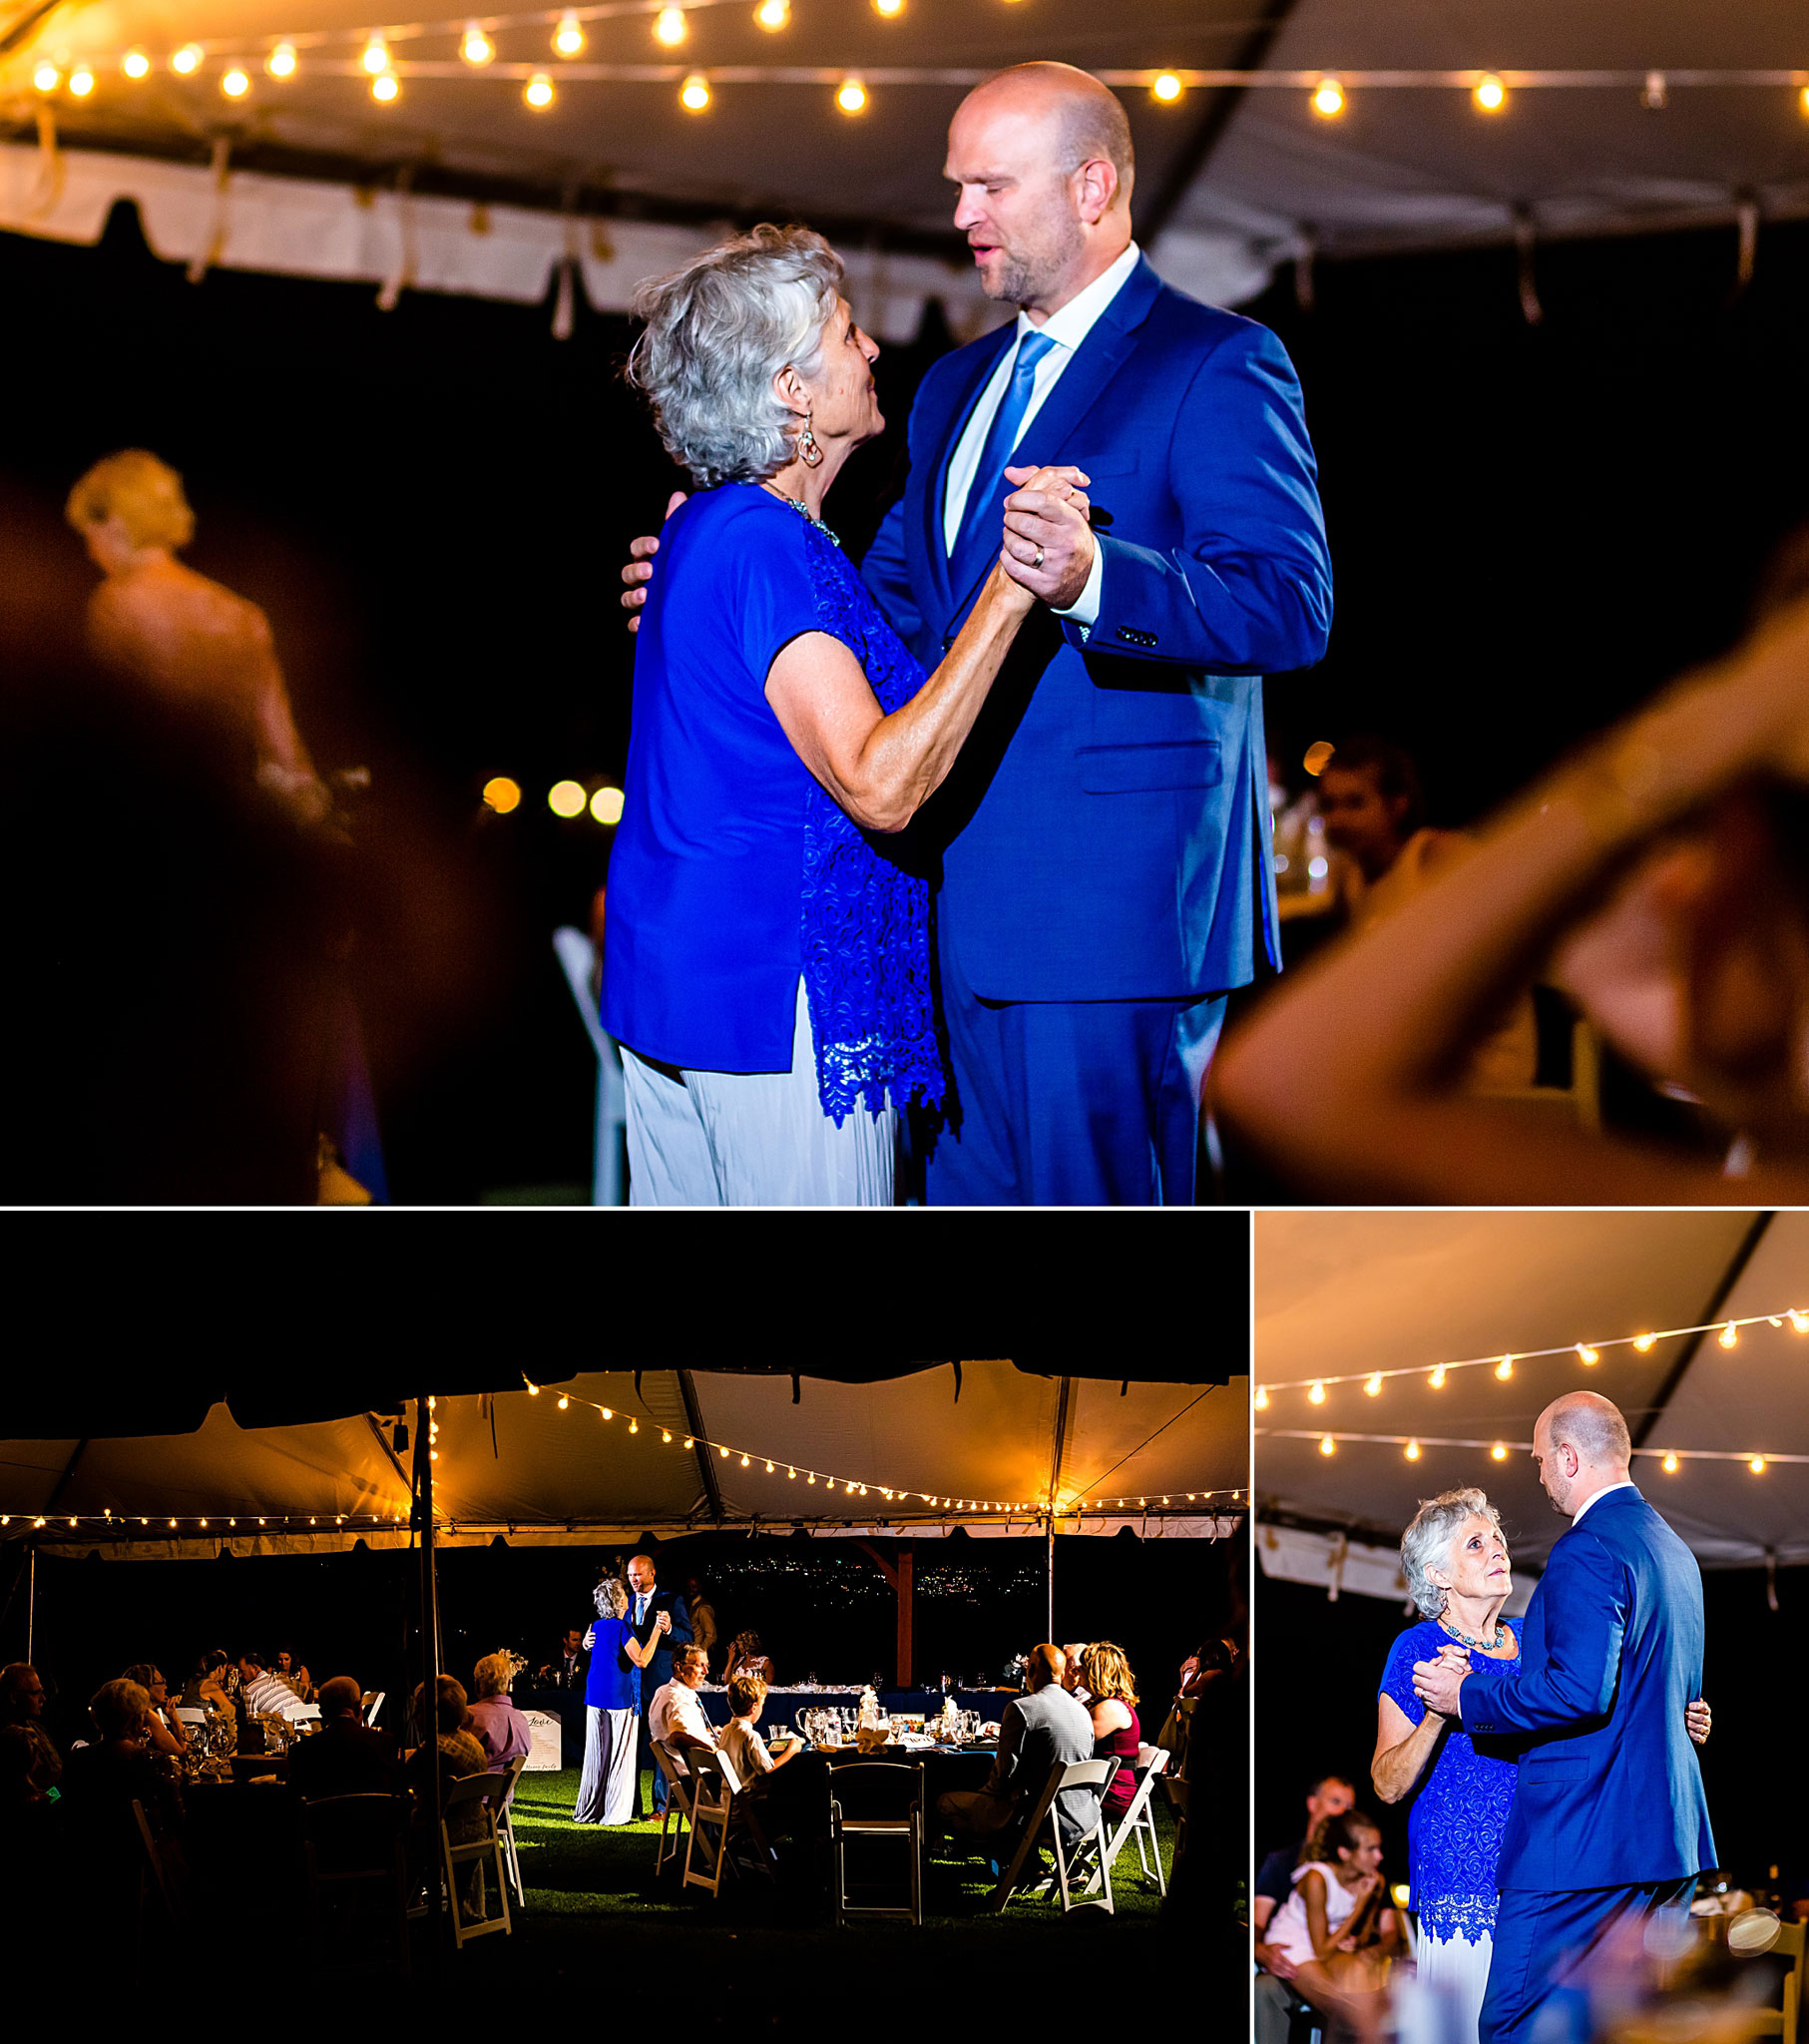 Groom dancing with his mother. Kelli & Jason's golf course wedding at The Ranch Country Club by Colorado Wedding Photographer Jennifer Garza, Small wedding ideas, Intimate wedding, Golf Course Wedding, Country Club Wedding, Summer Wedding, Golf Wedding, Wedding planning, Colorado Wedding Photographer, Colorado Elopement Photographer, Colorado Elopement, Colorado Wedding, Denver Wedding Photographer, Denver Wedding, Wedding Inspiration, Summer Wedding Inspiration, Covid Wedding